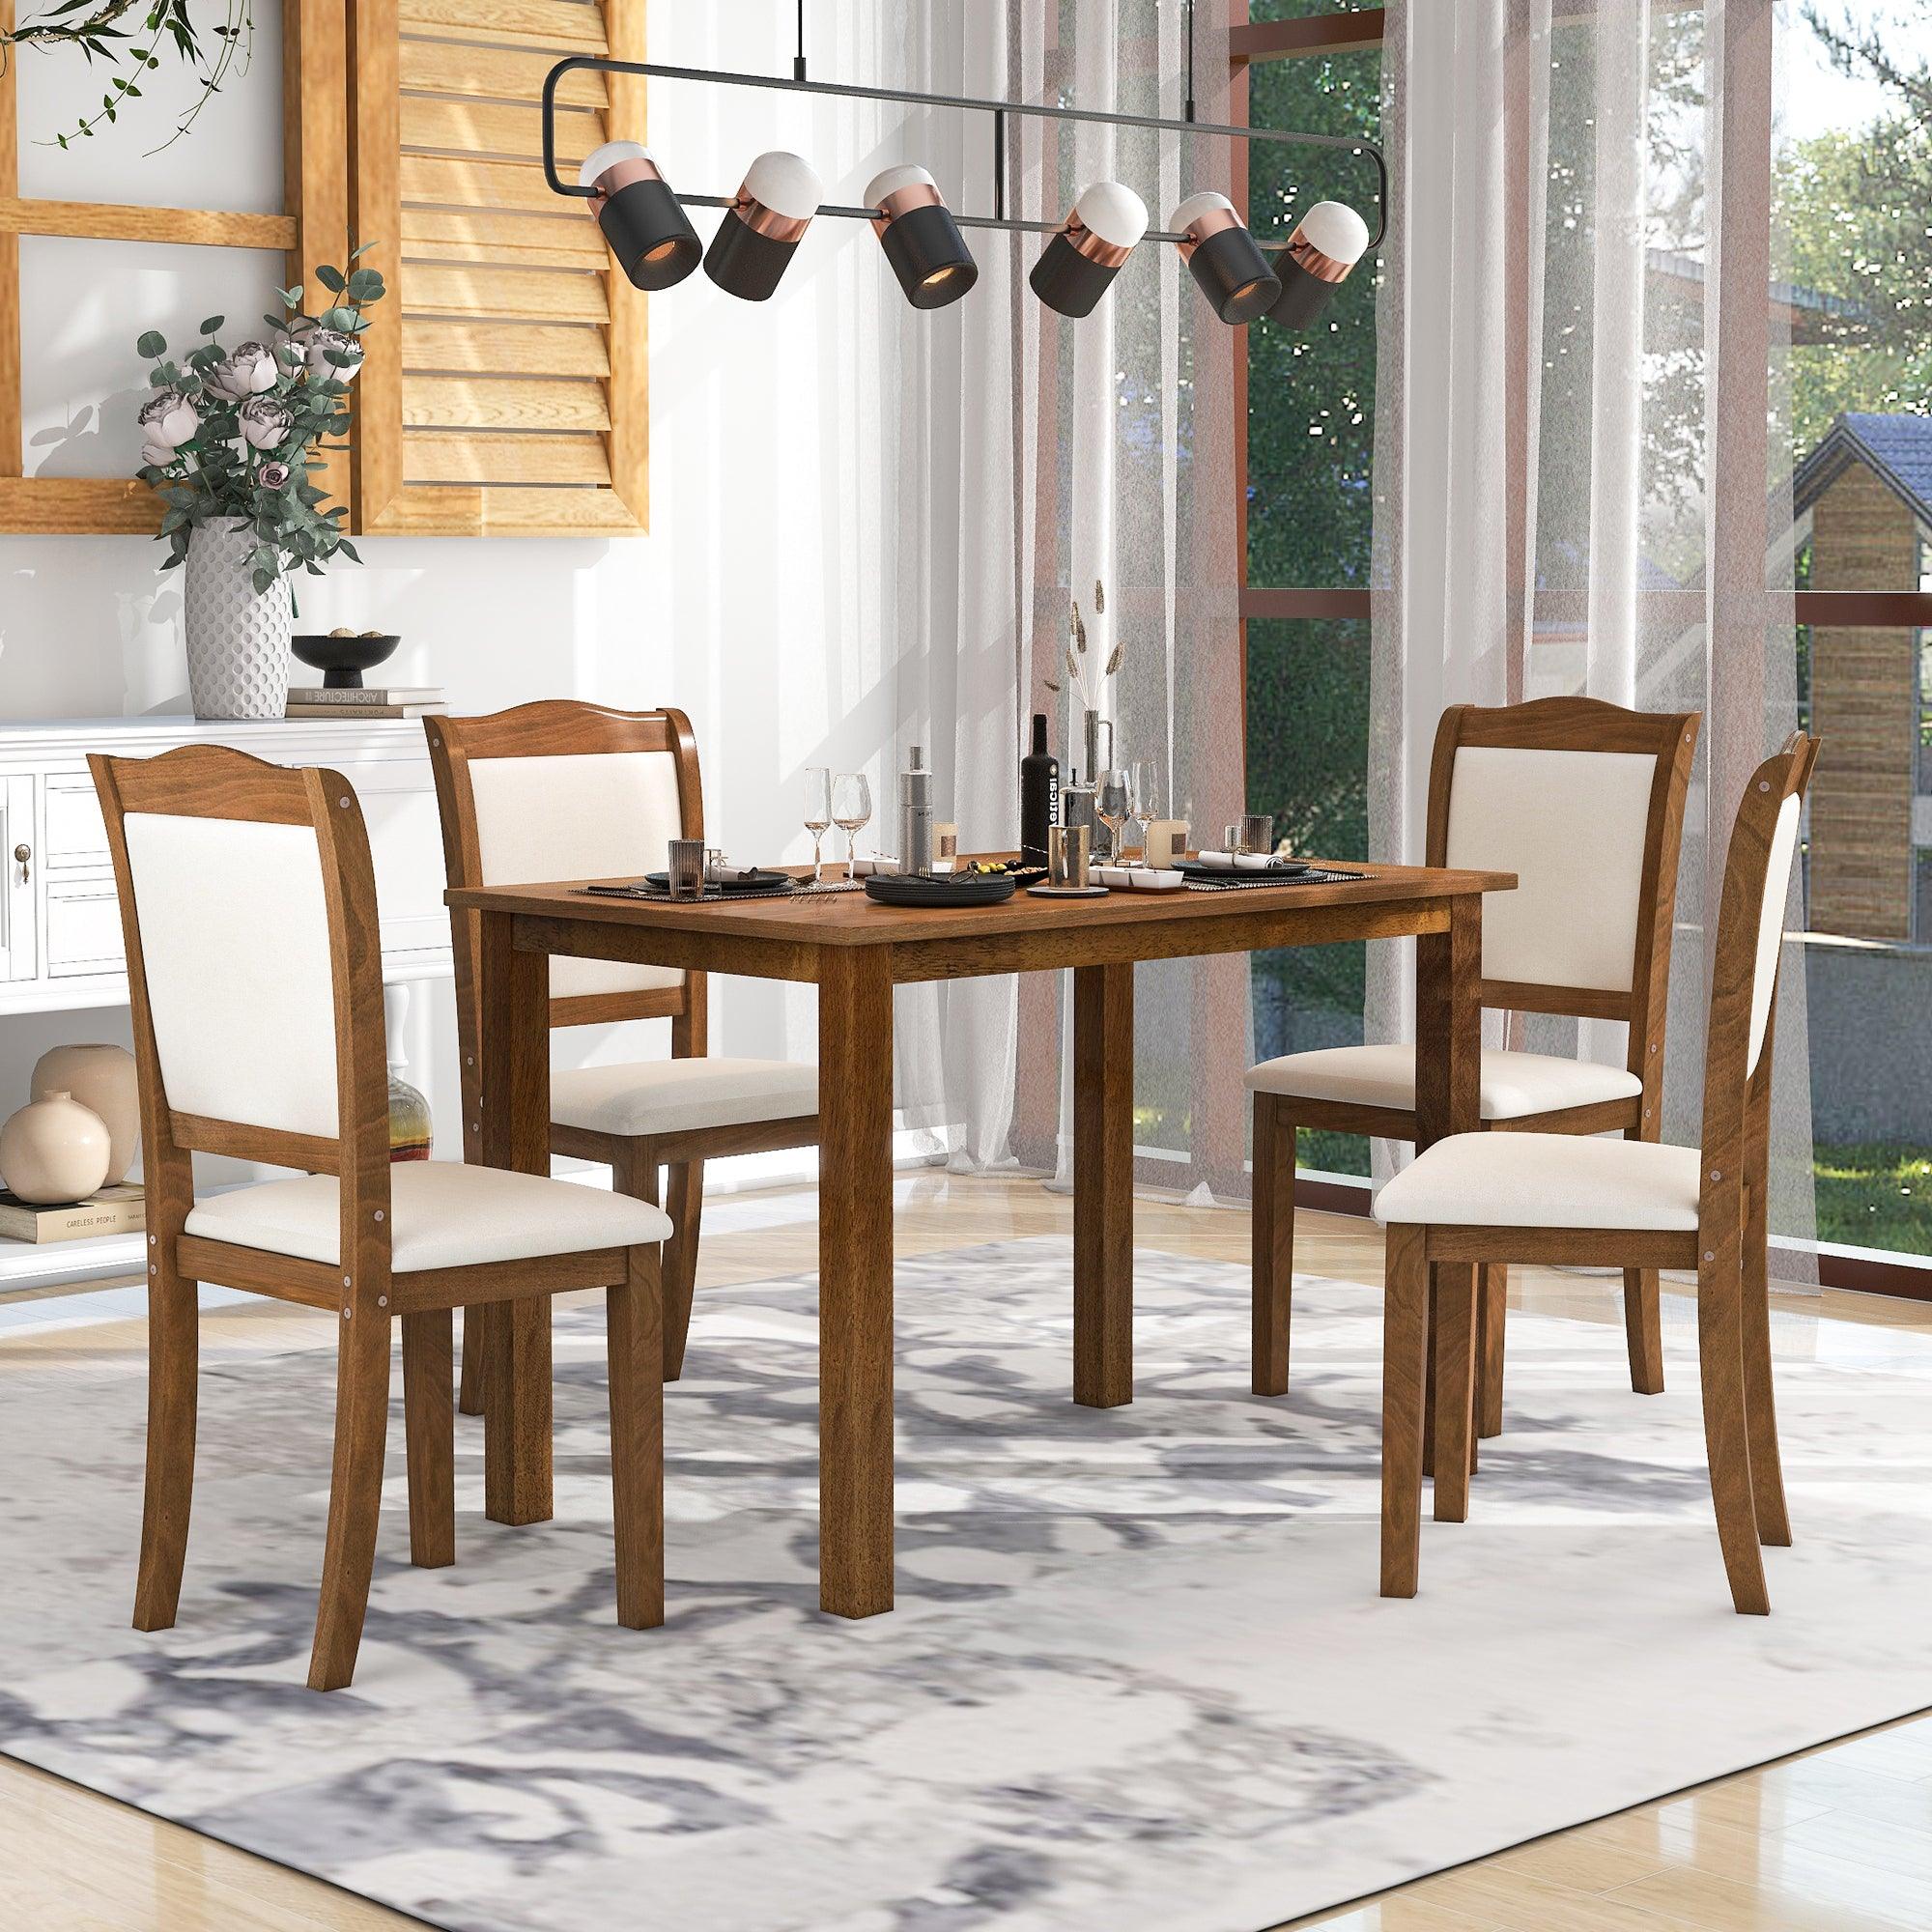 🆓🚛 5-Piece Wood Dining Table Set Simple Style Kitchen Dining Set, Rectangular Table With 4 Upholstered Chairs for Limited Space, Walnut